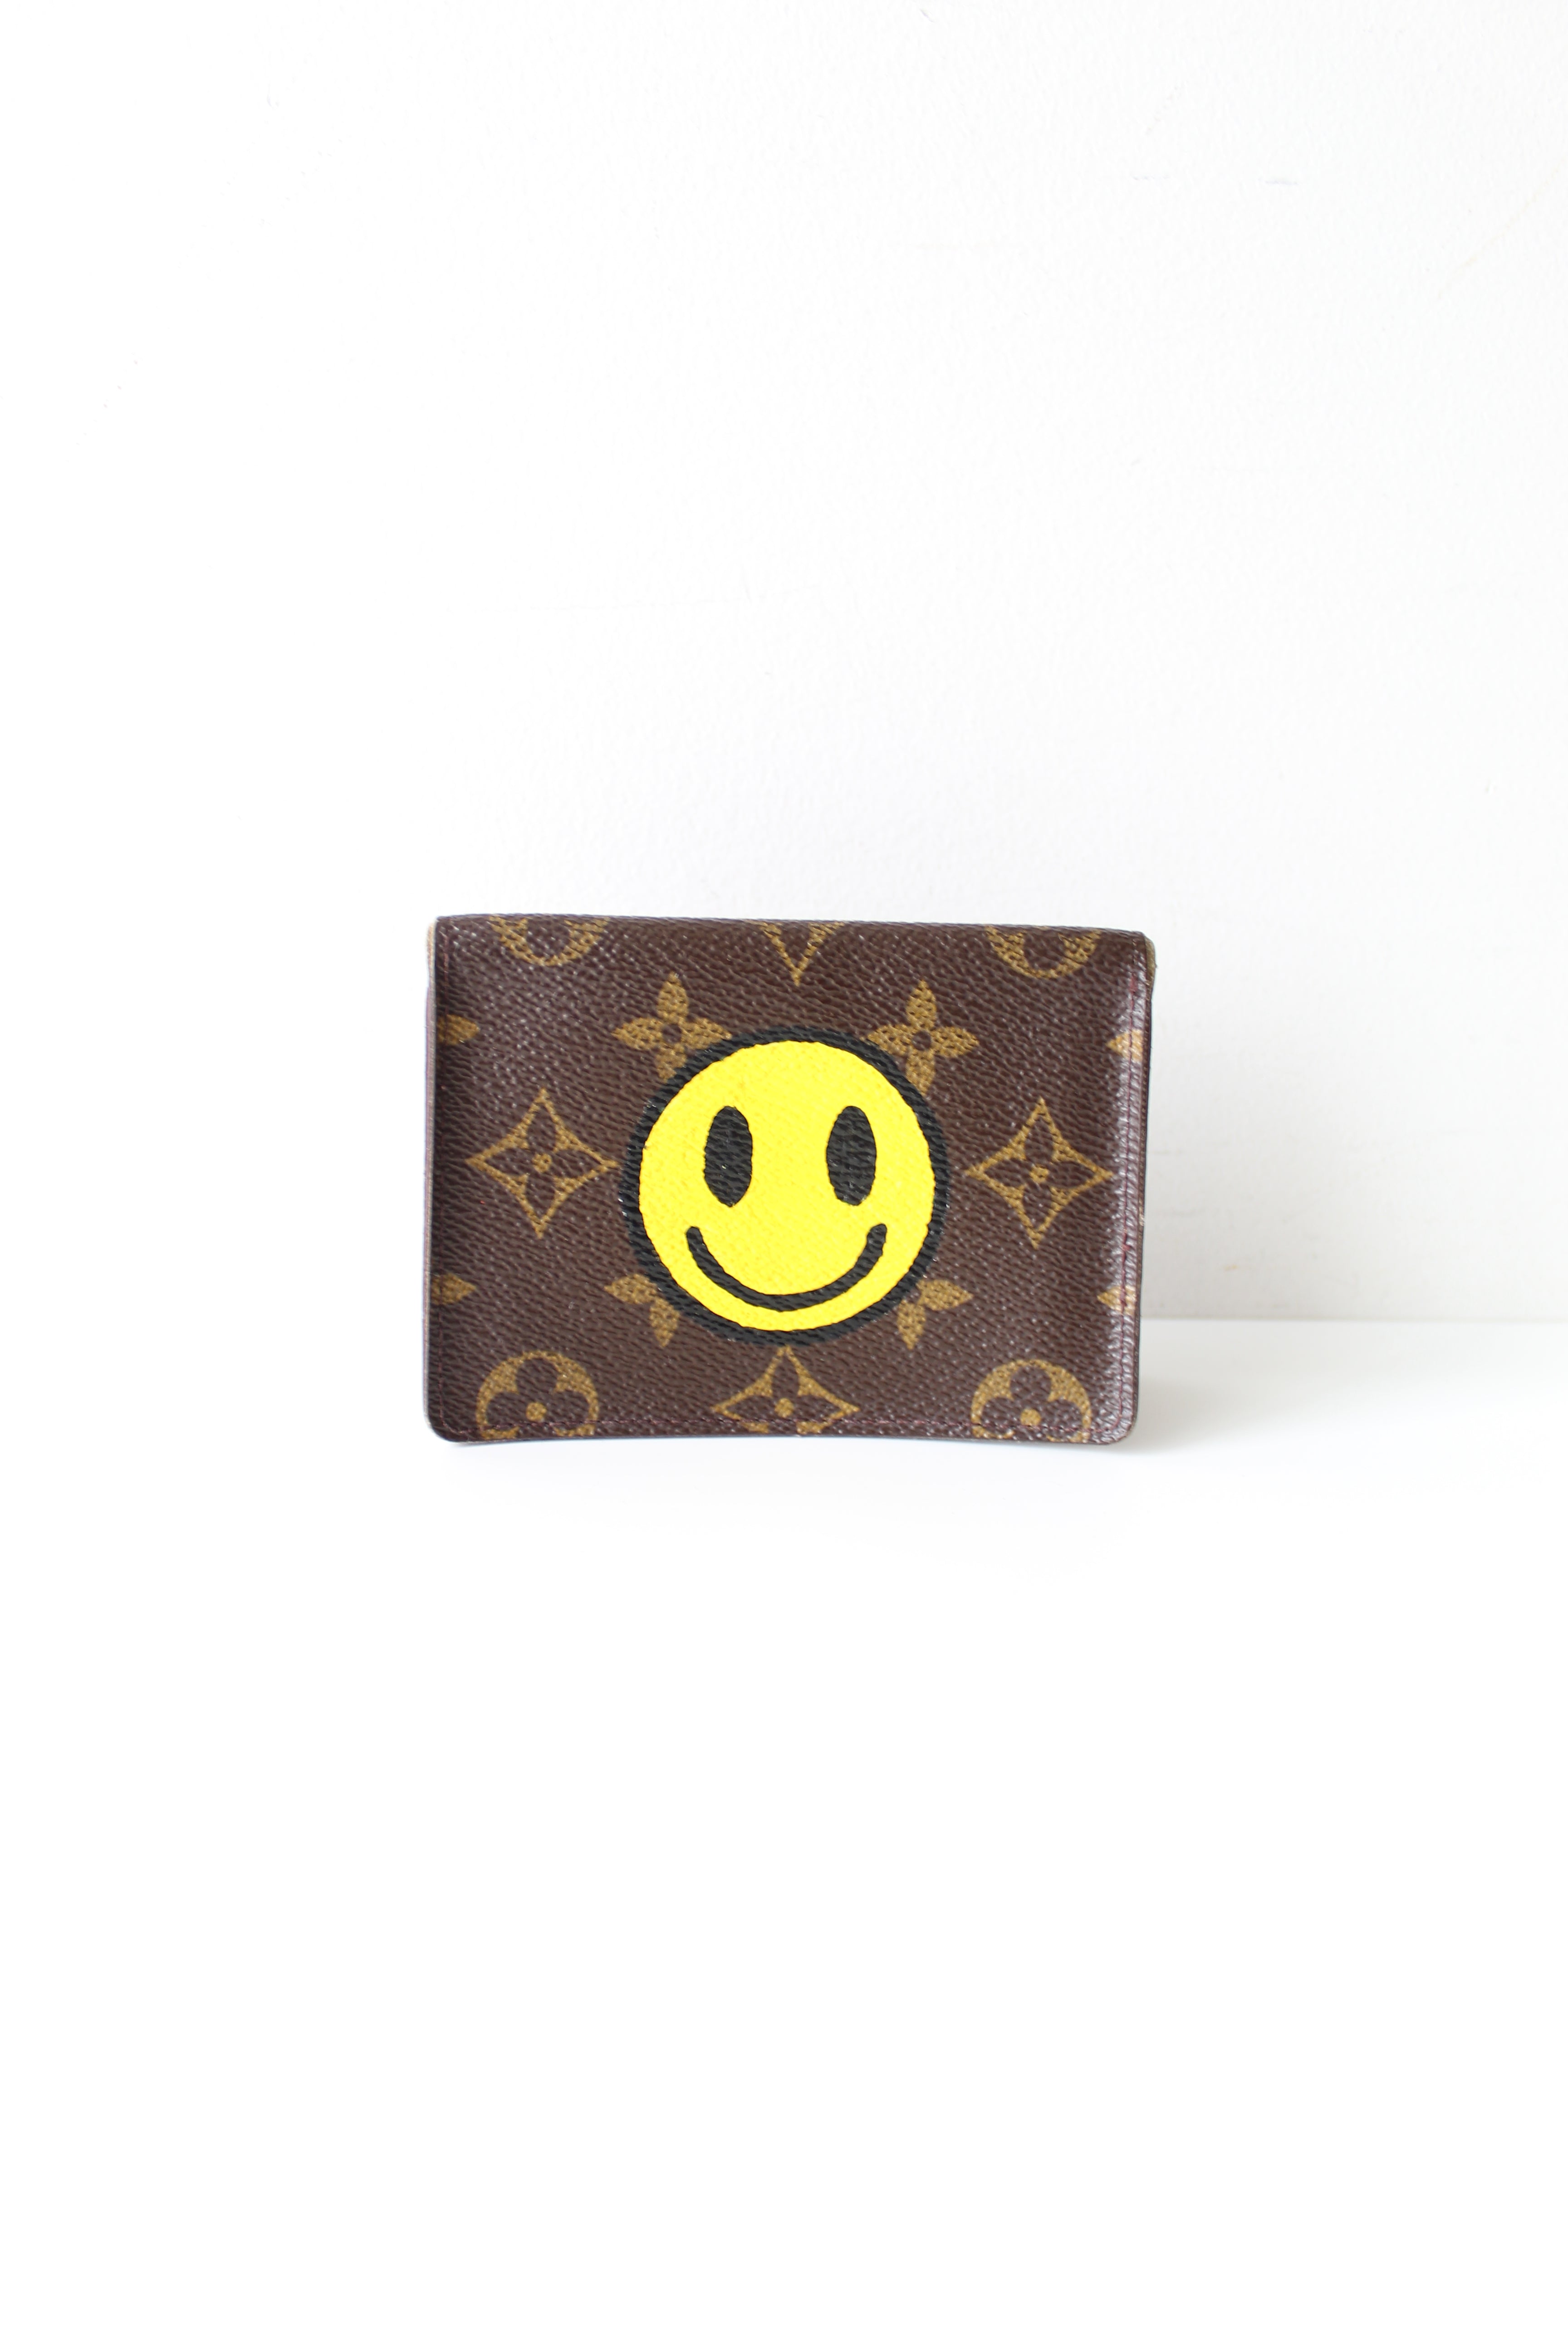 Louis Vuitton Card Holder - 62 For Sale on 1stDibs